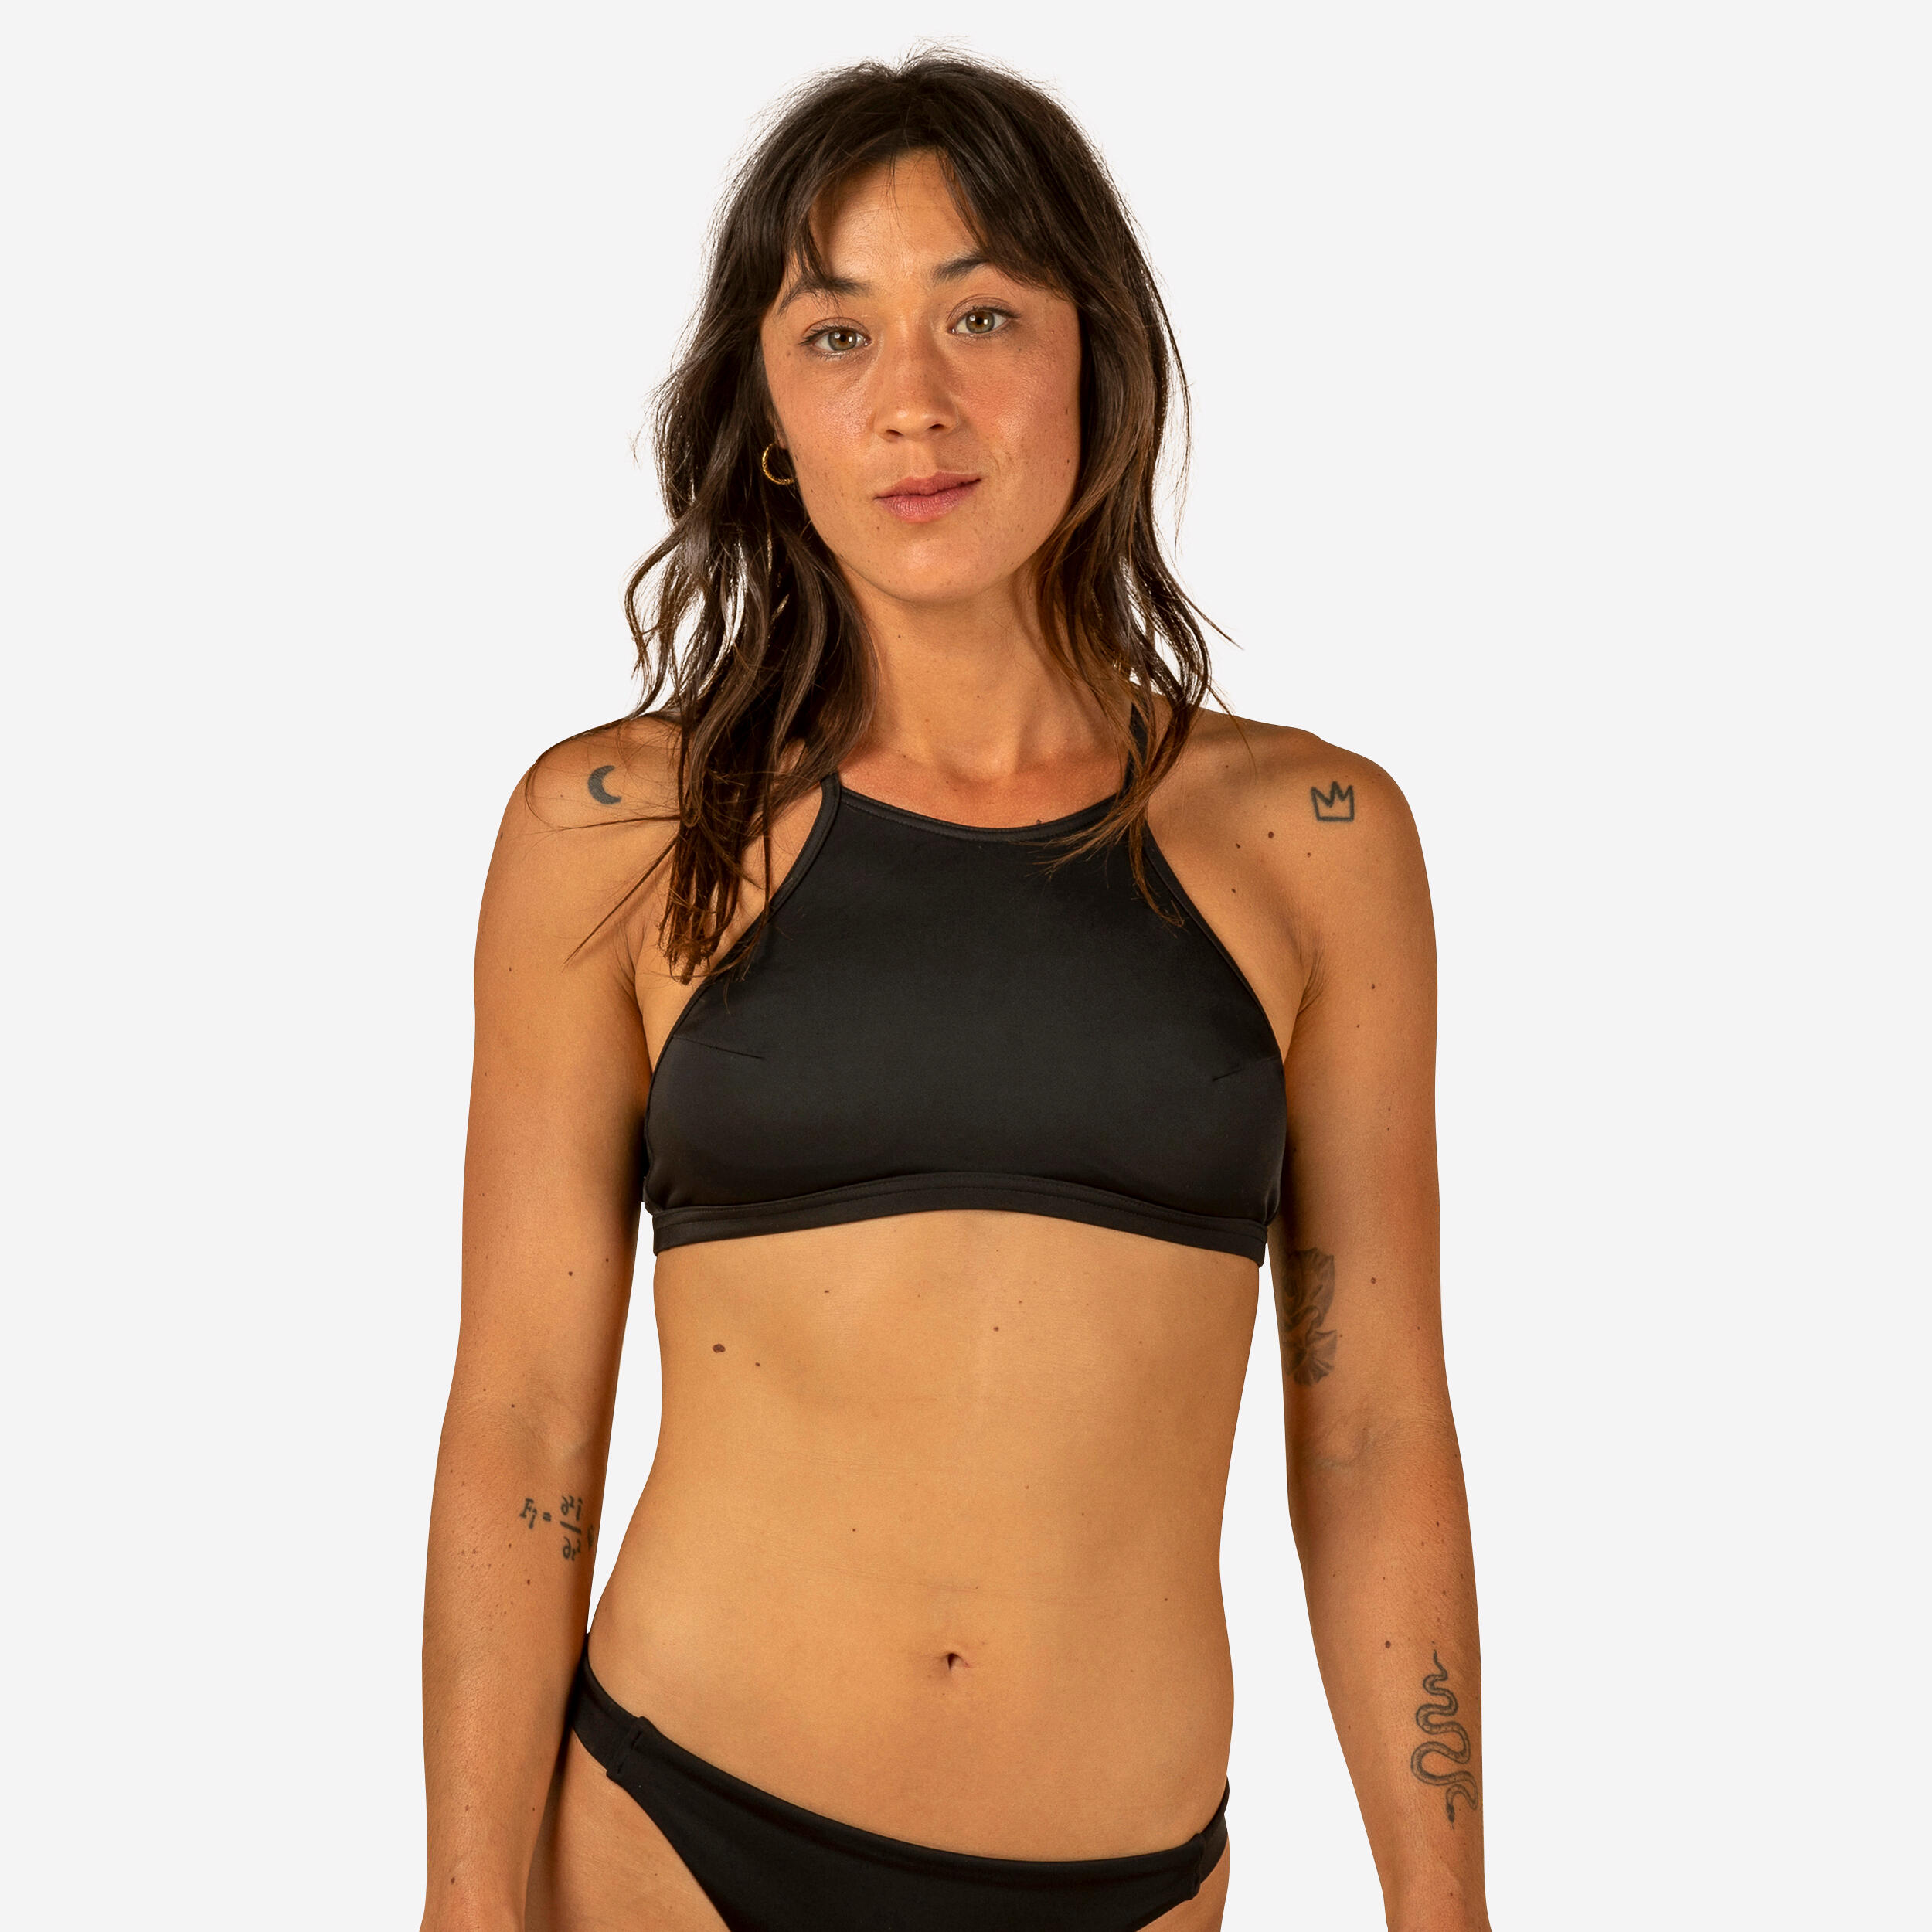 WOMEN'S SURFING SWIMSUIT BIKINI TOP WITH PADDED CUPS ANDREA - BLACK 1/8